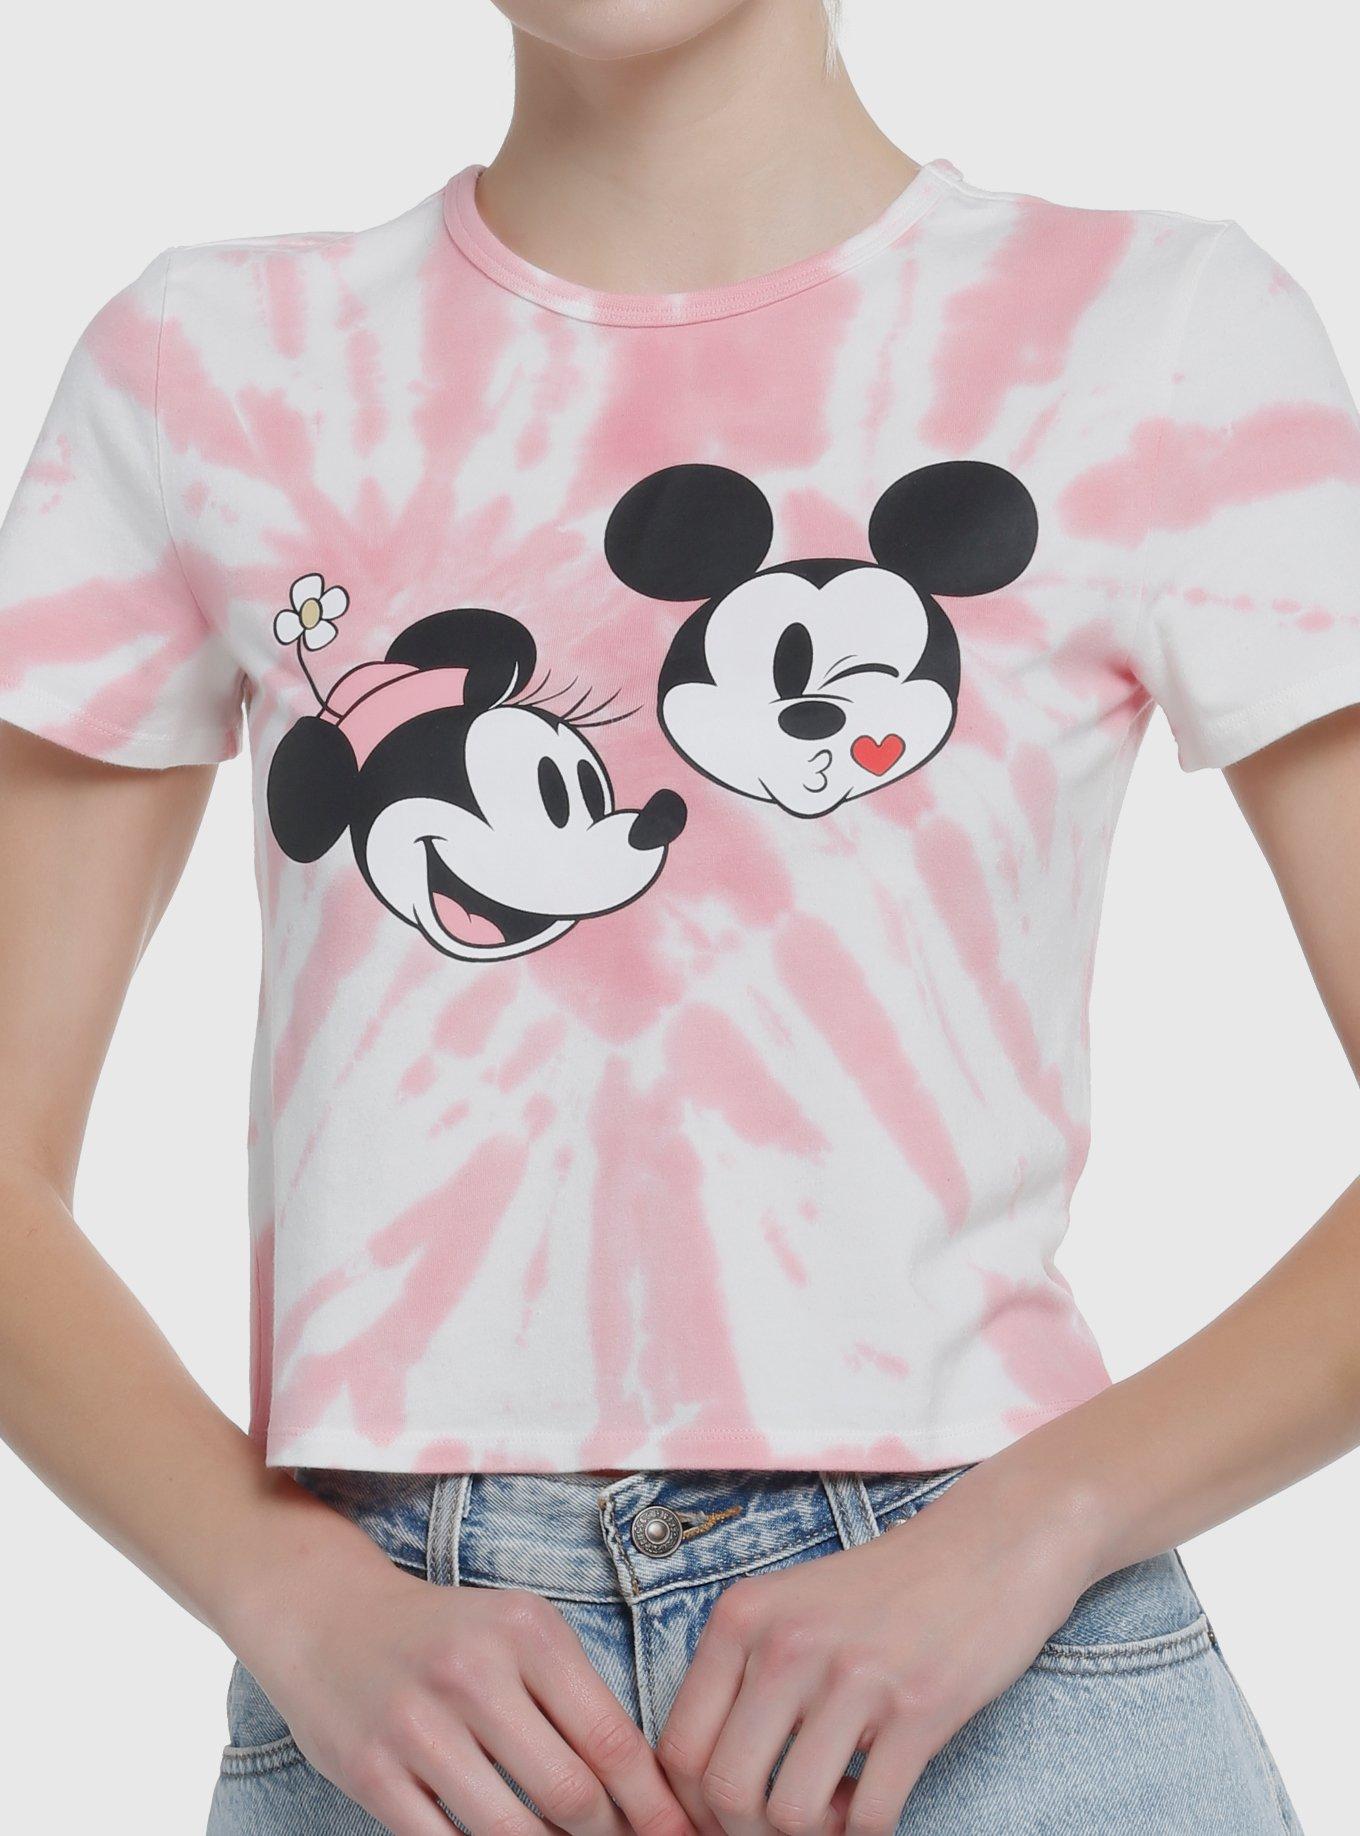 Her Universe Disney Mickey Mouse & Minnie Mouse Kiss Tie-Dye Crop Girls T-Shirt